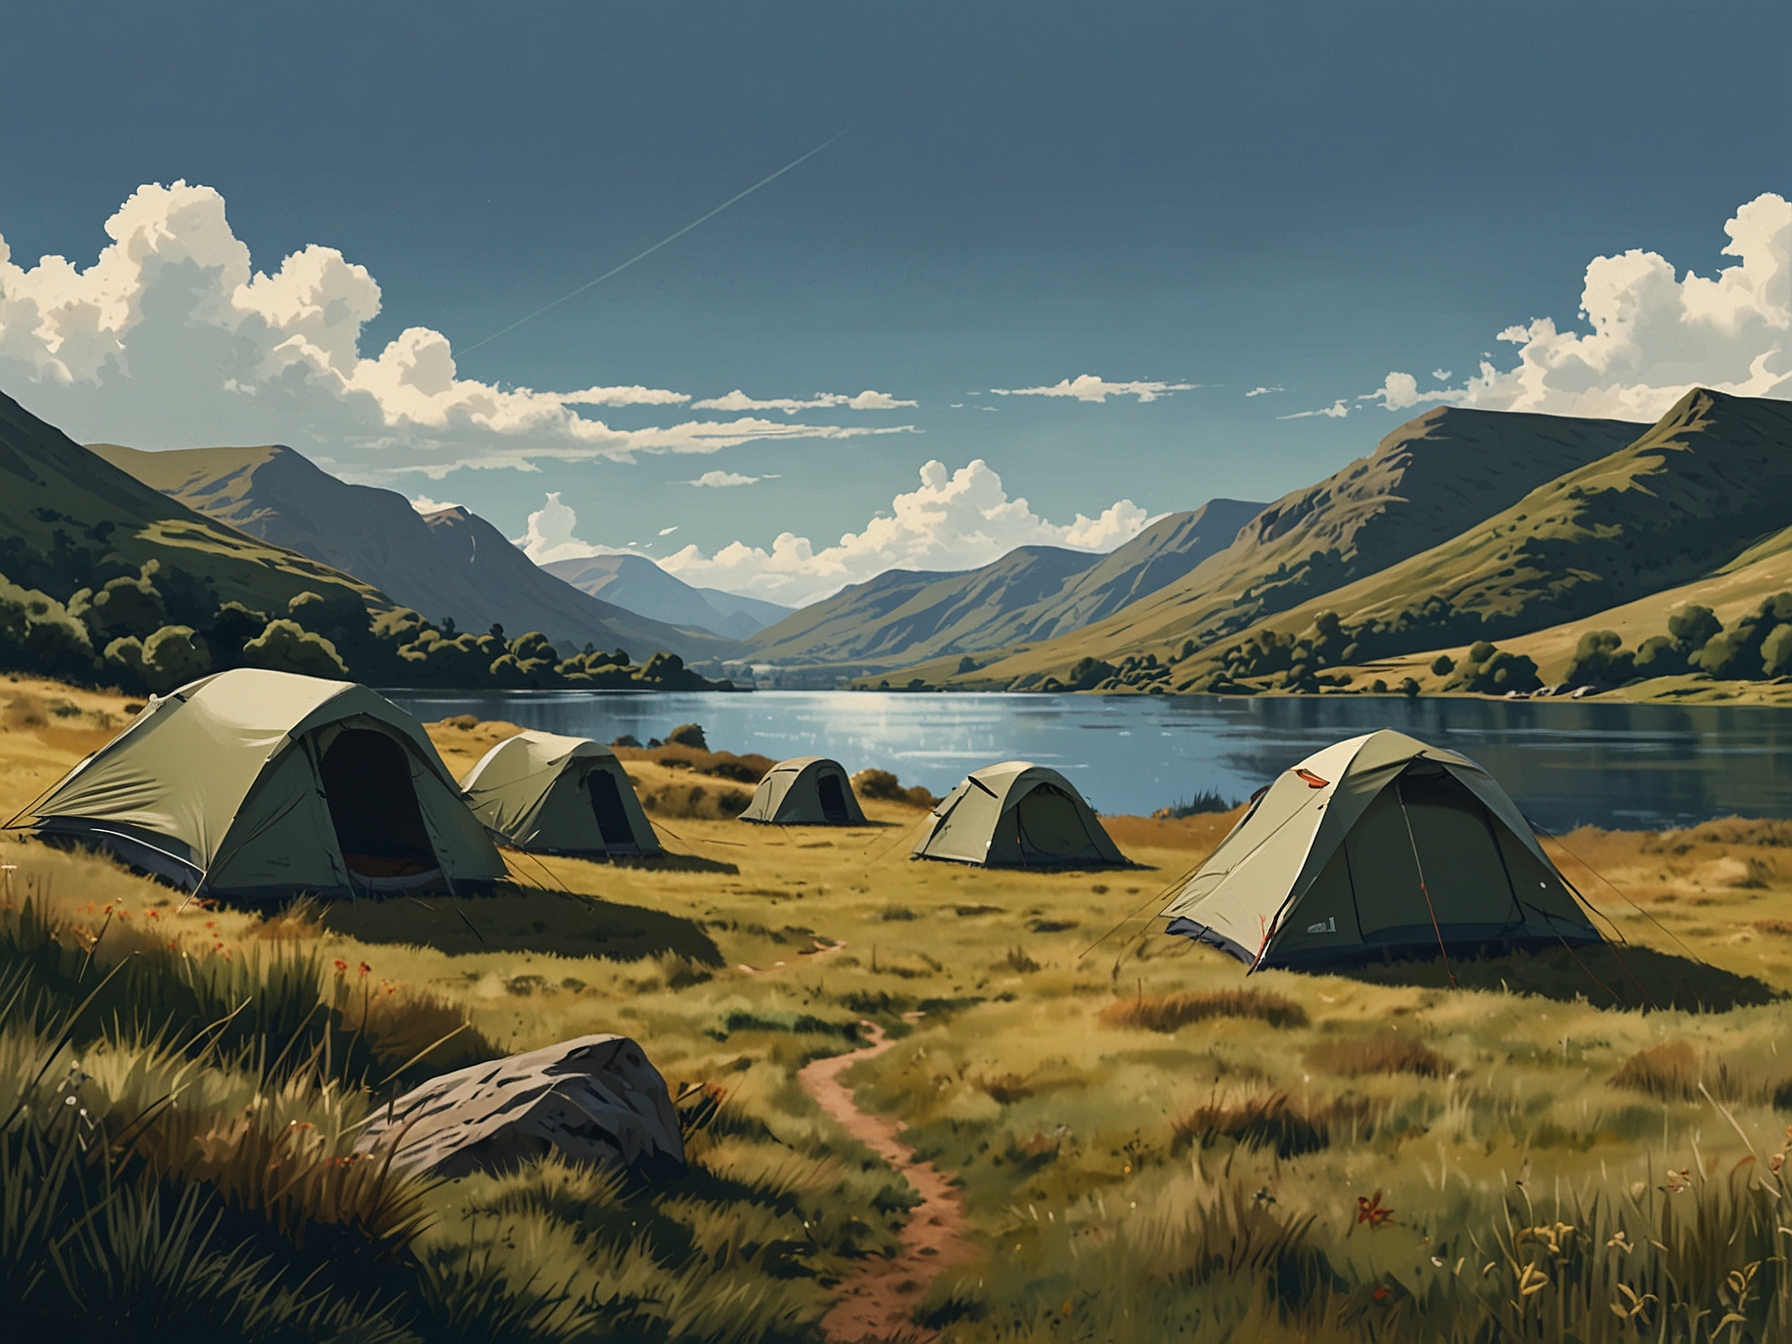 A serene campsite in the Lake District with tents set up by the lakeside, surrounded by rolling hills and clear blue skies, capturing the natural beauty and tranquility of the area.